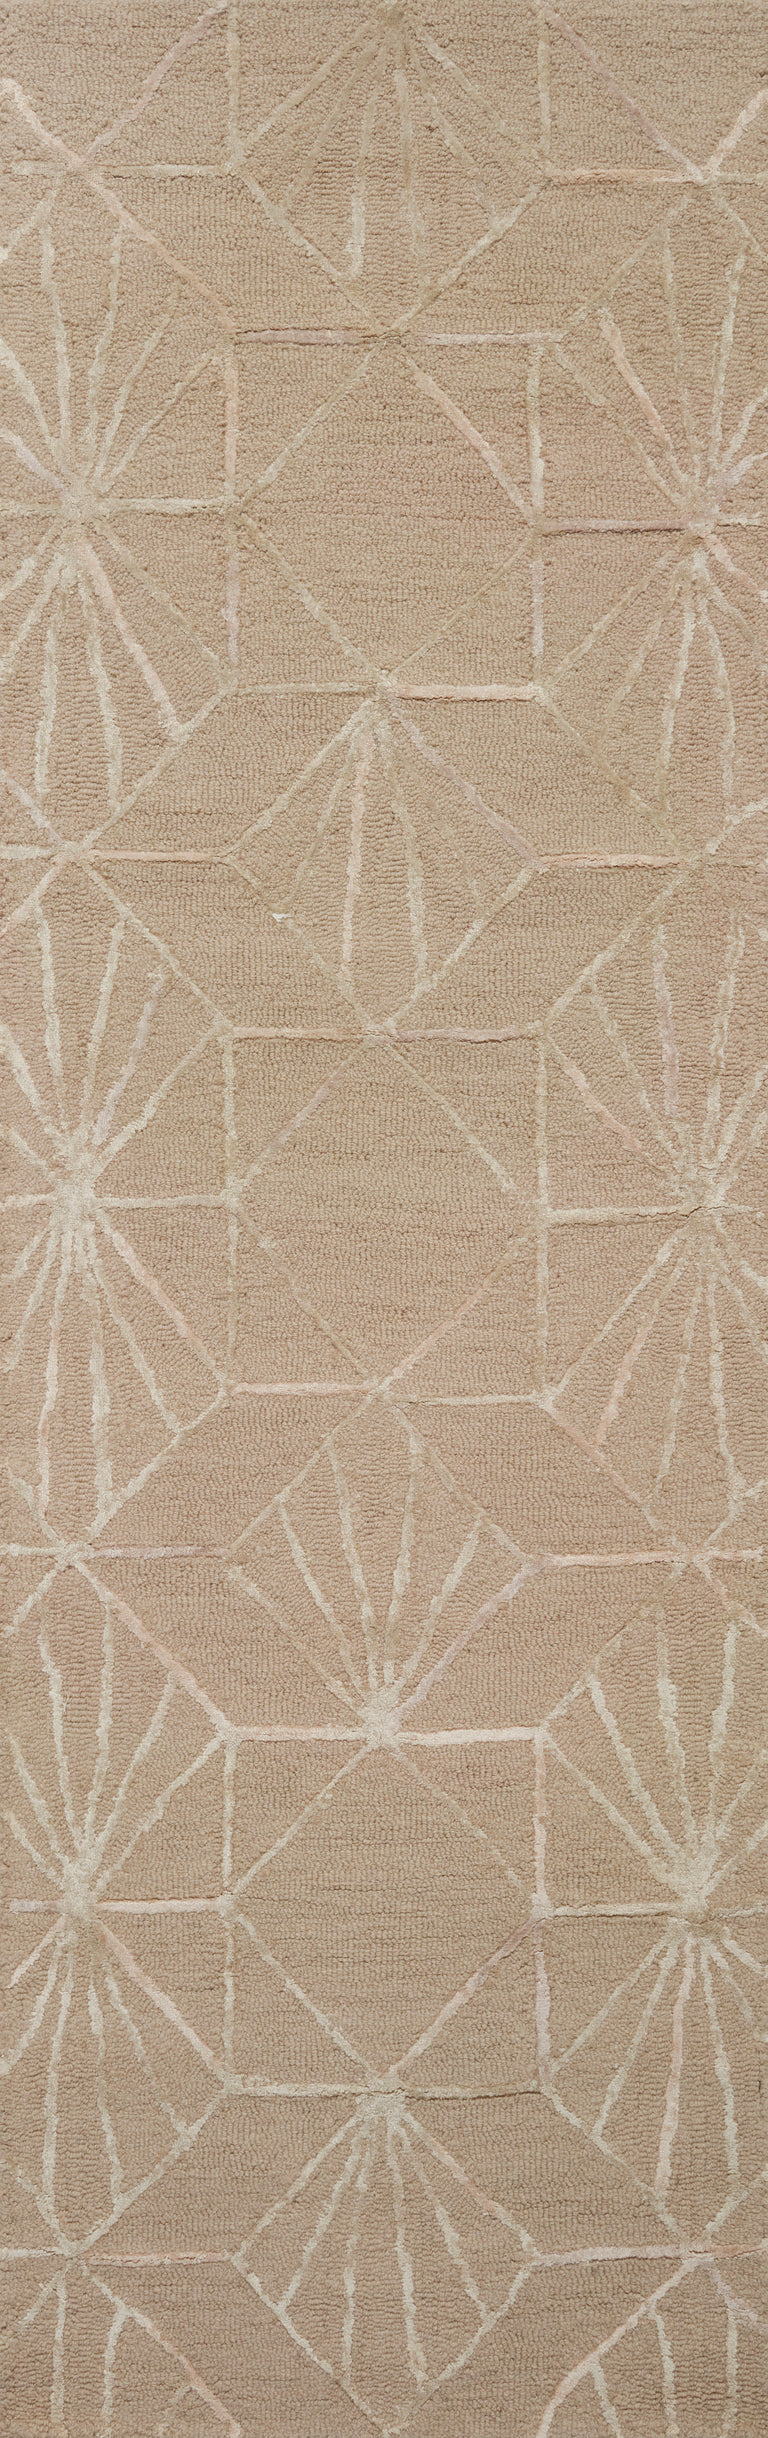 Loloi Rugs Verve Collection Rug in Sand, Blush - 7'9" x 9'9"